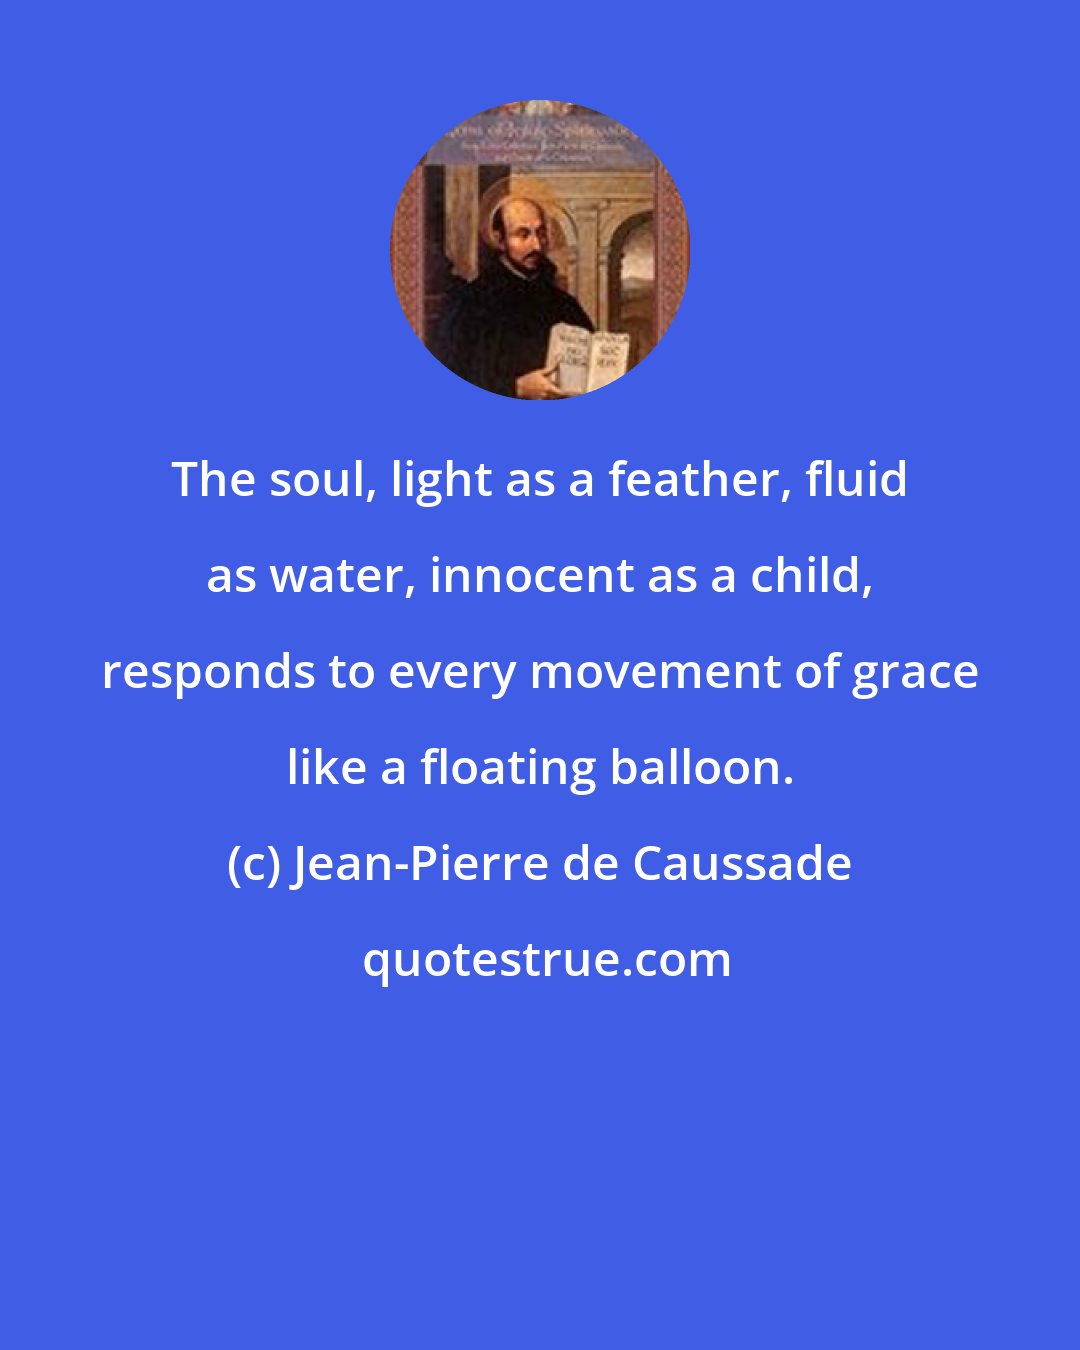 Jean-Pierre de Caussade: The soul, light as a feather, fluid as water, innocent as a child, responds to every movement of grace like a floating balloon.